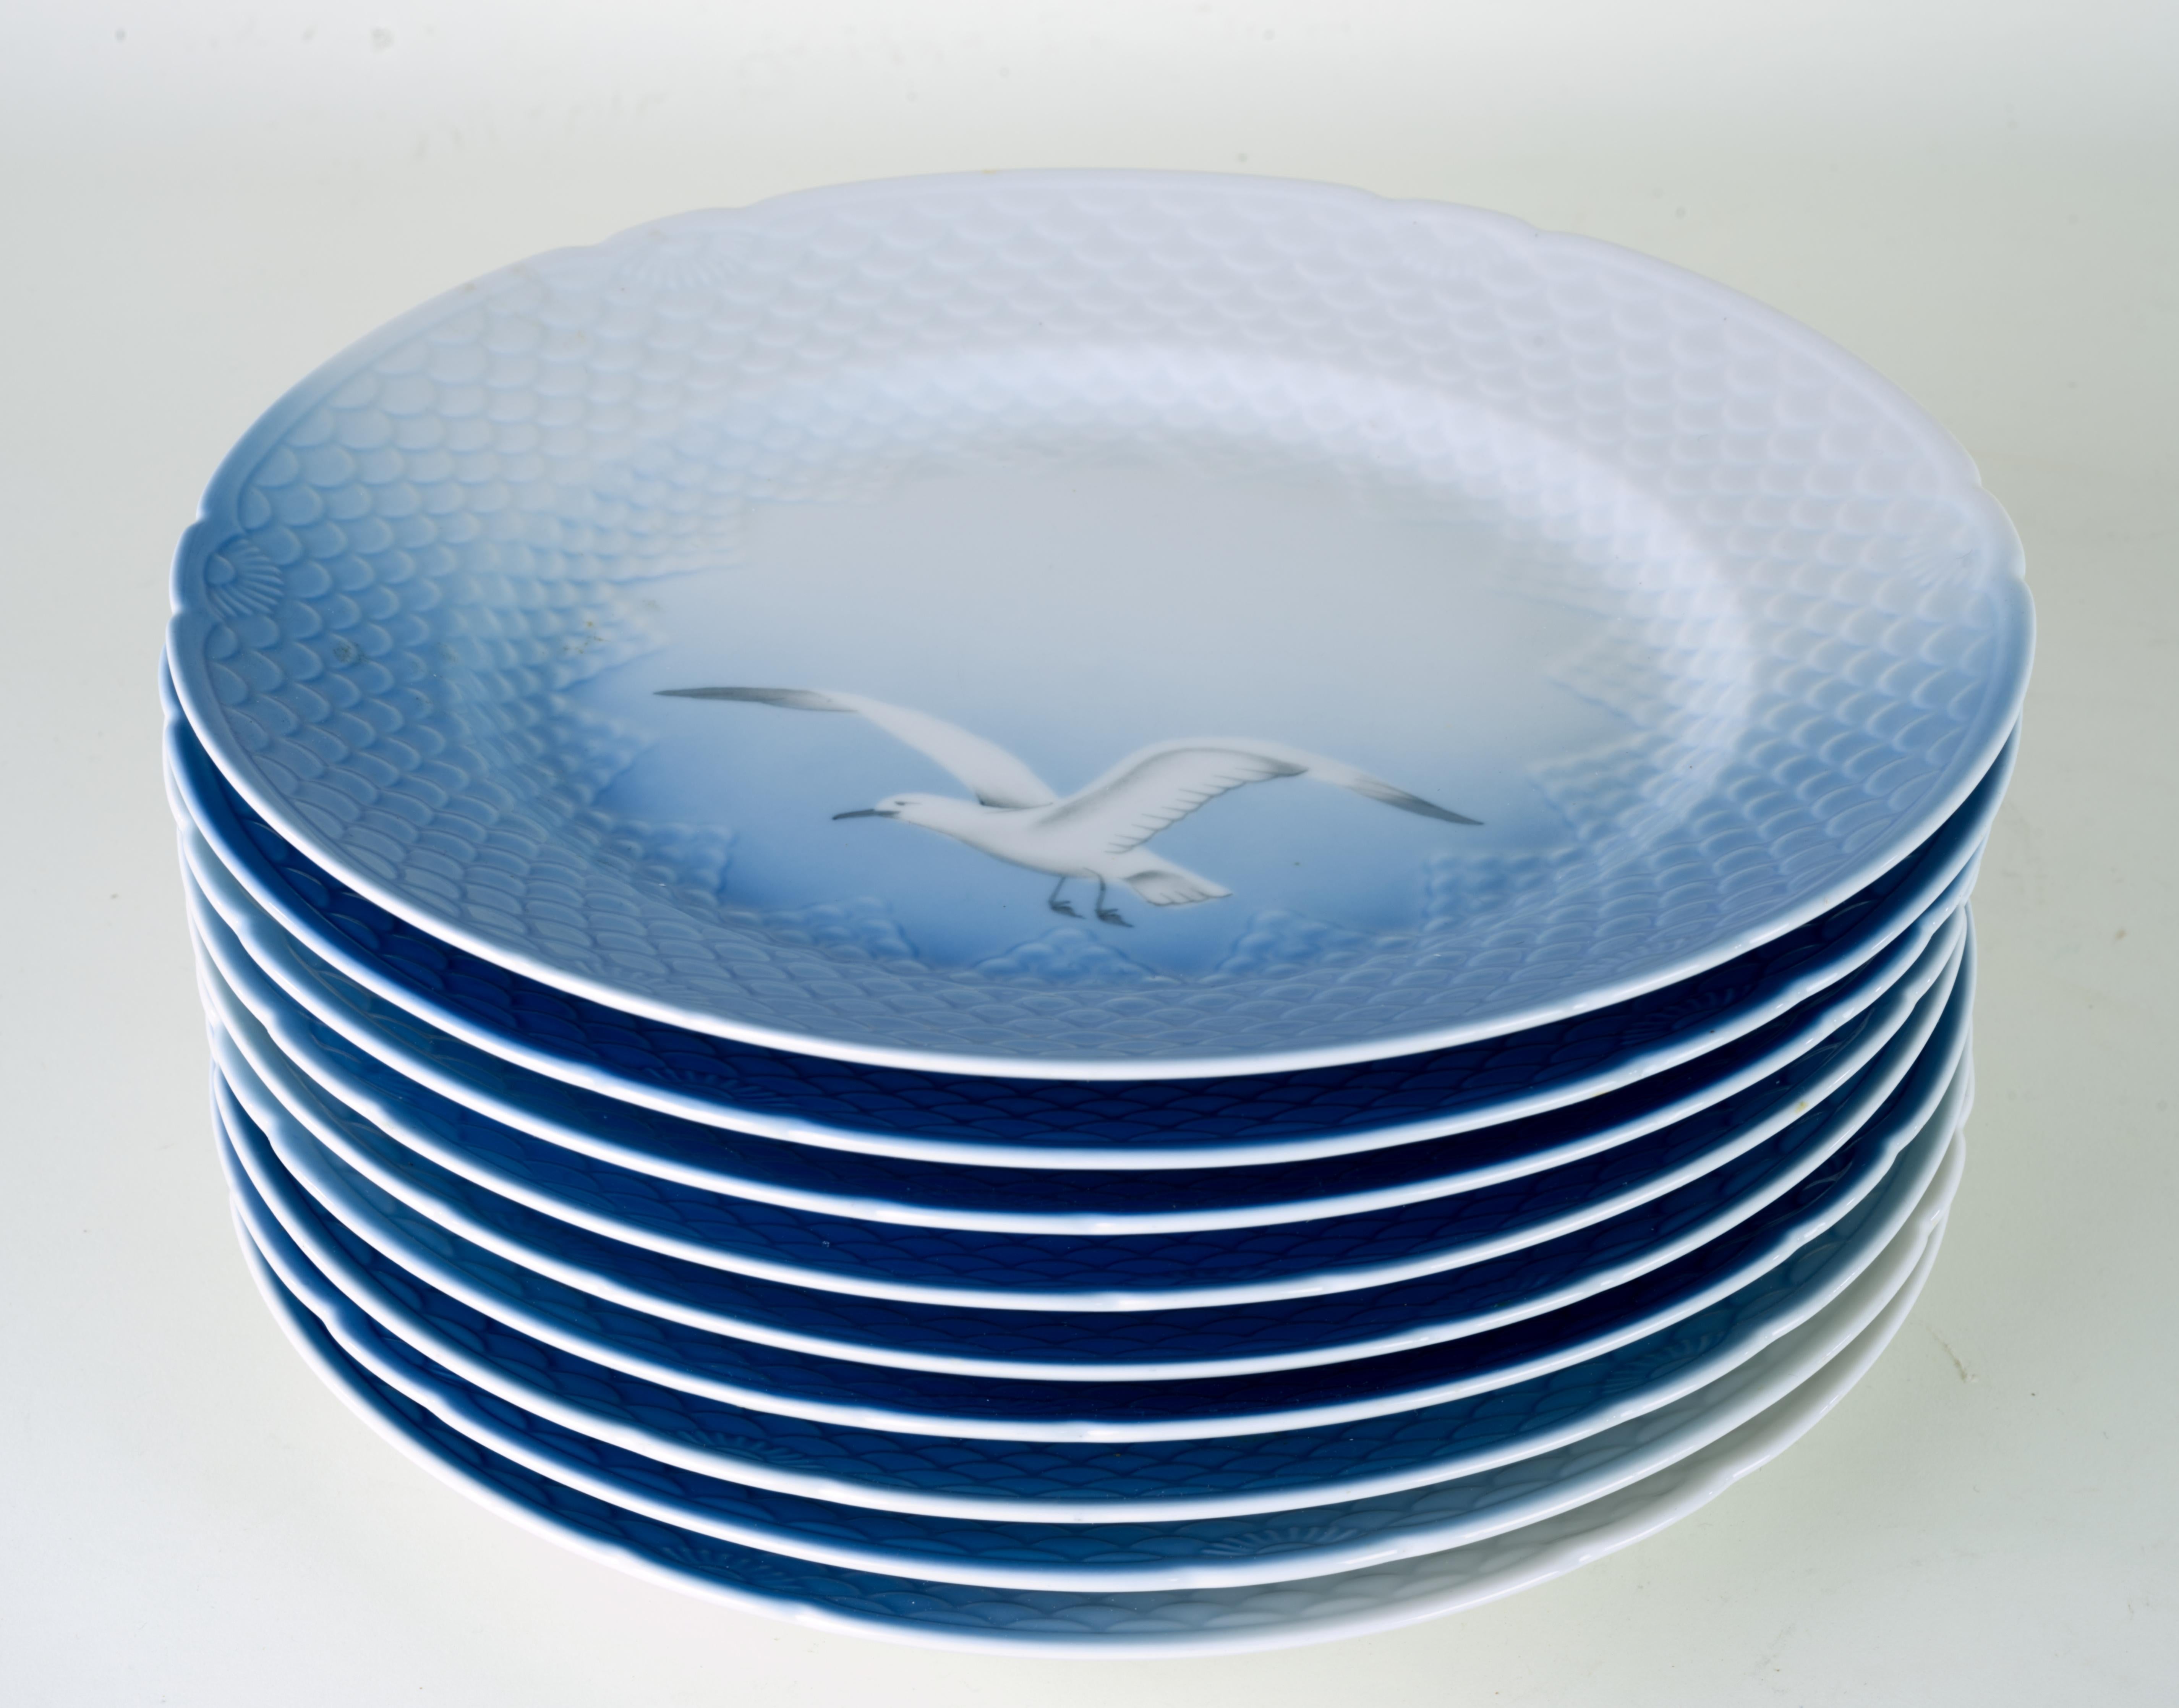 
Bing & Grondahl Seagull Set consists of 9 dinner plates 9.65